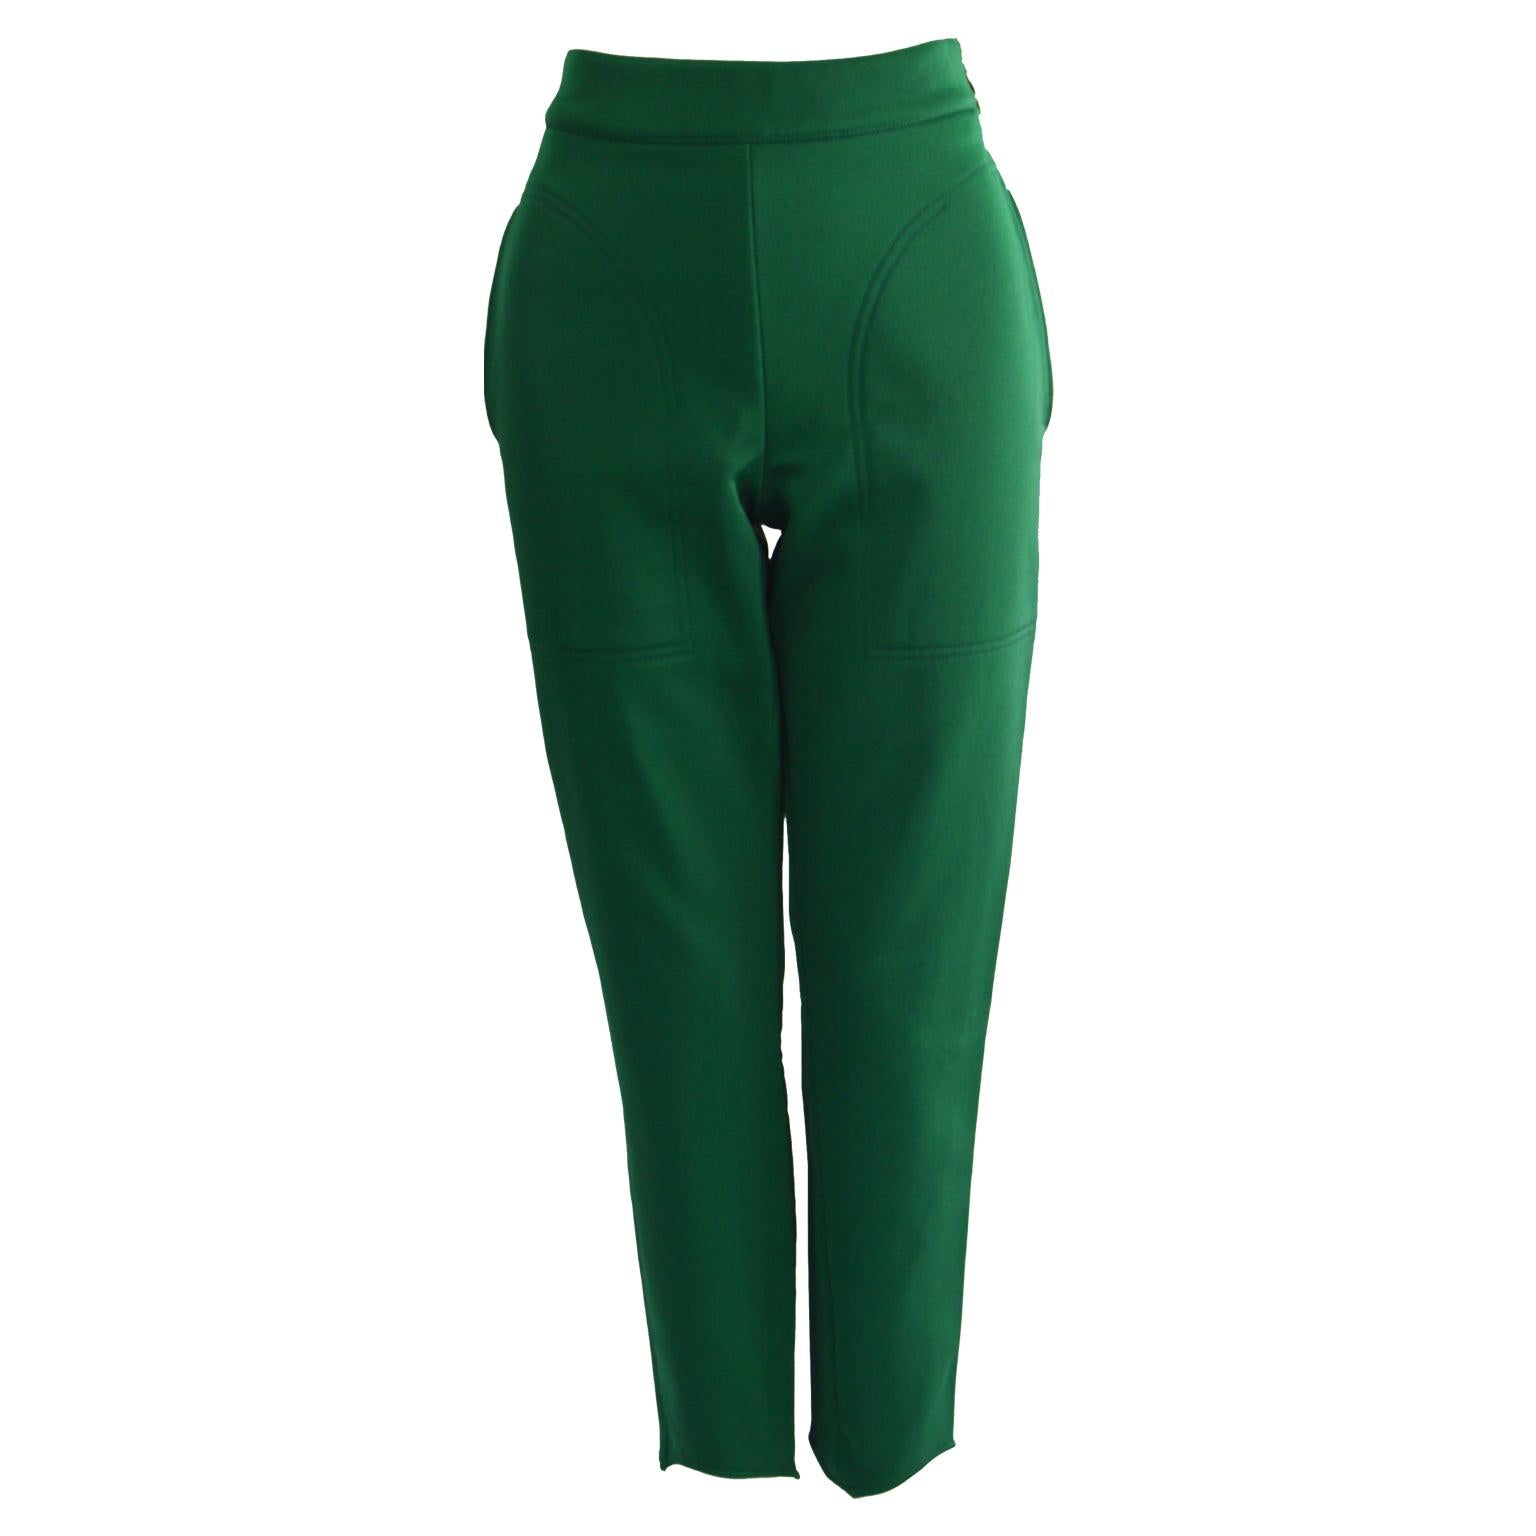 Moschino Green Stretch Jersey Slim Leg High Waist Vintage Pants, 1980s  For Sale